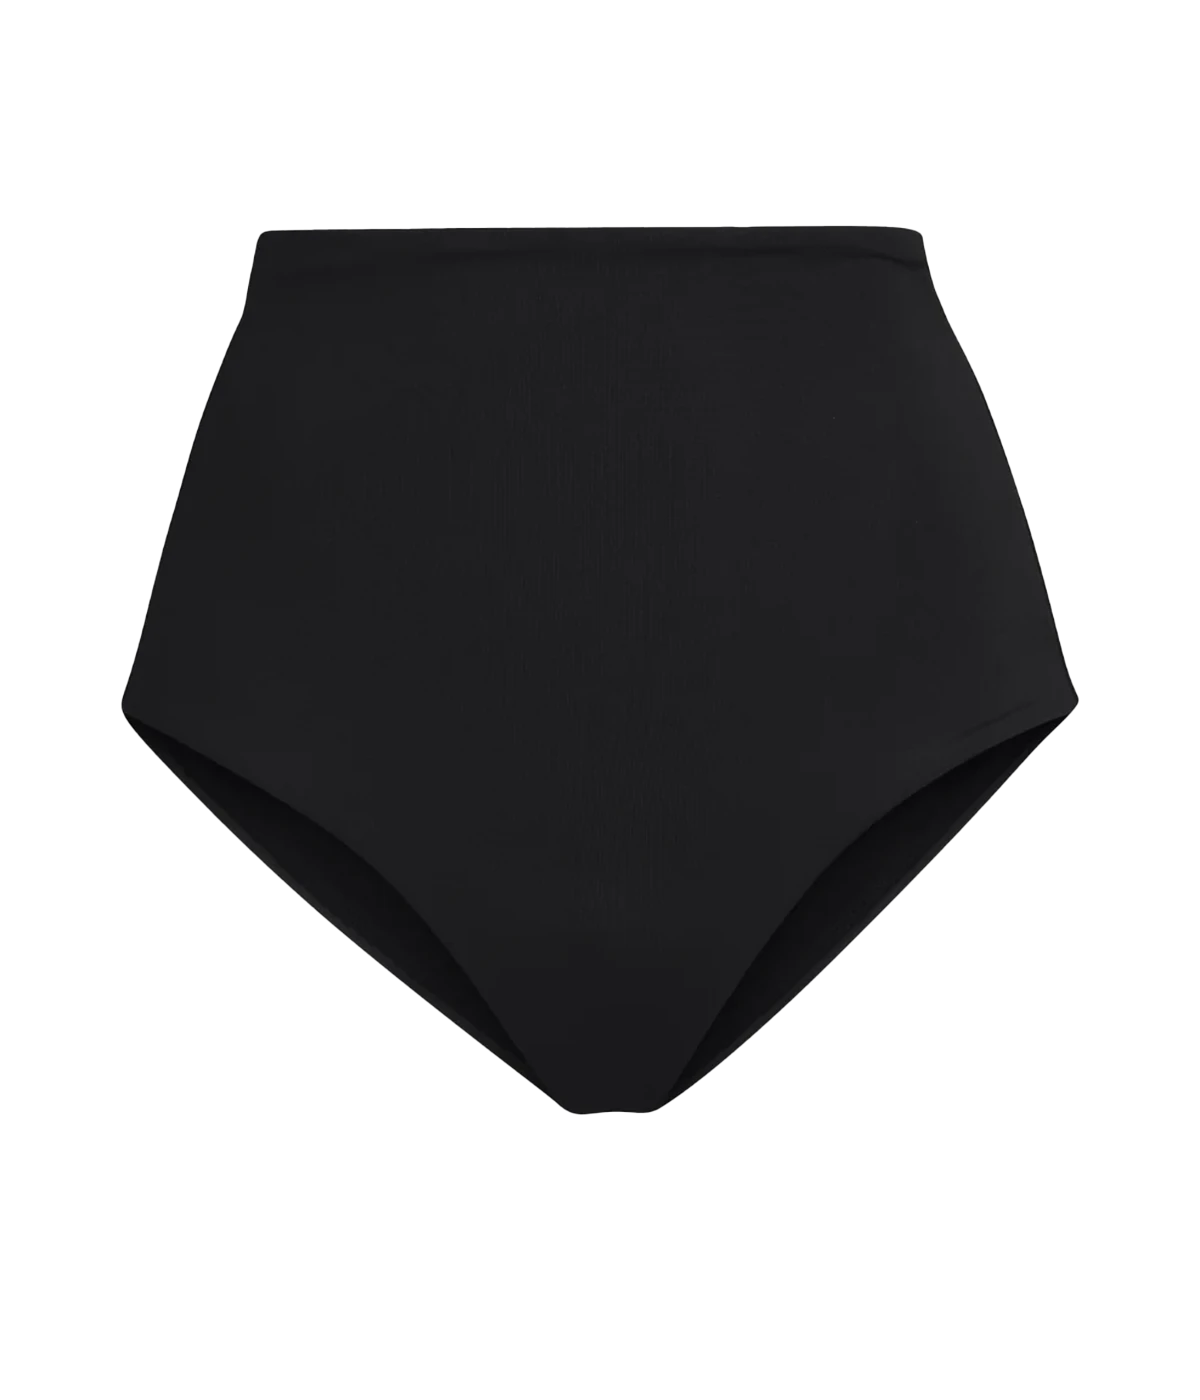 An elegant black high cut leg bikini, the Hi Tide Bottom is a wardrobe staple. These medium coverage luxe bottoms hug you in, showing off your legs and just enough cheek. Sleek and sexy, this is a must-have bikini bottom for summer, at the pool or the beach. 